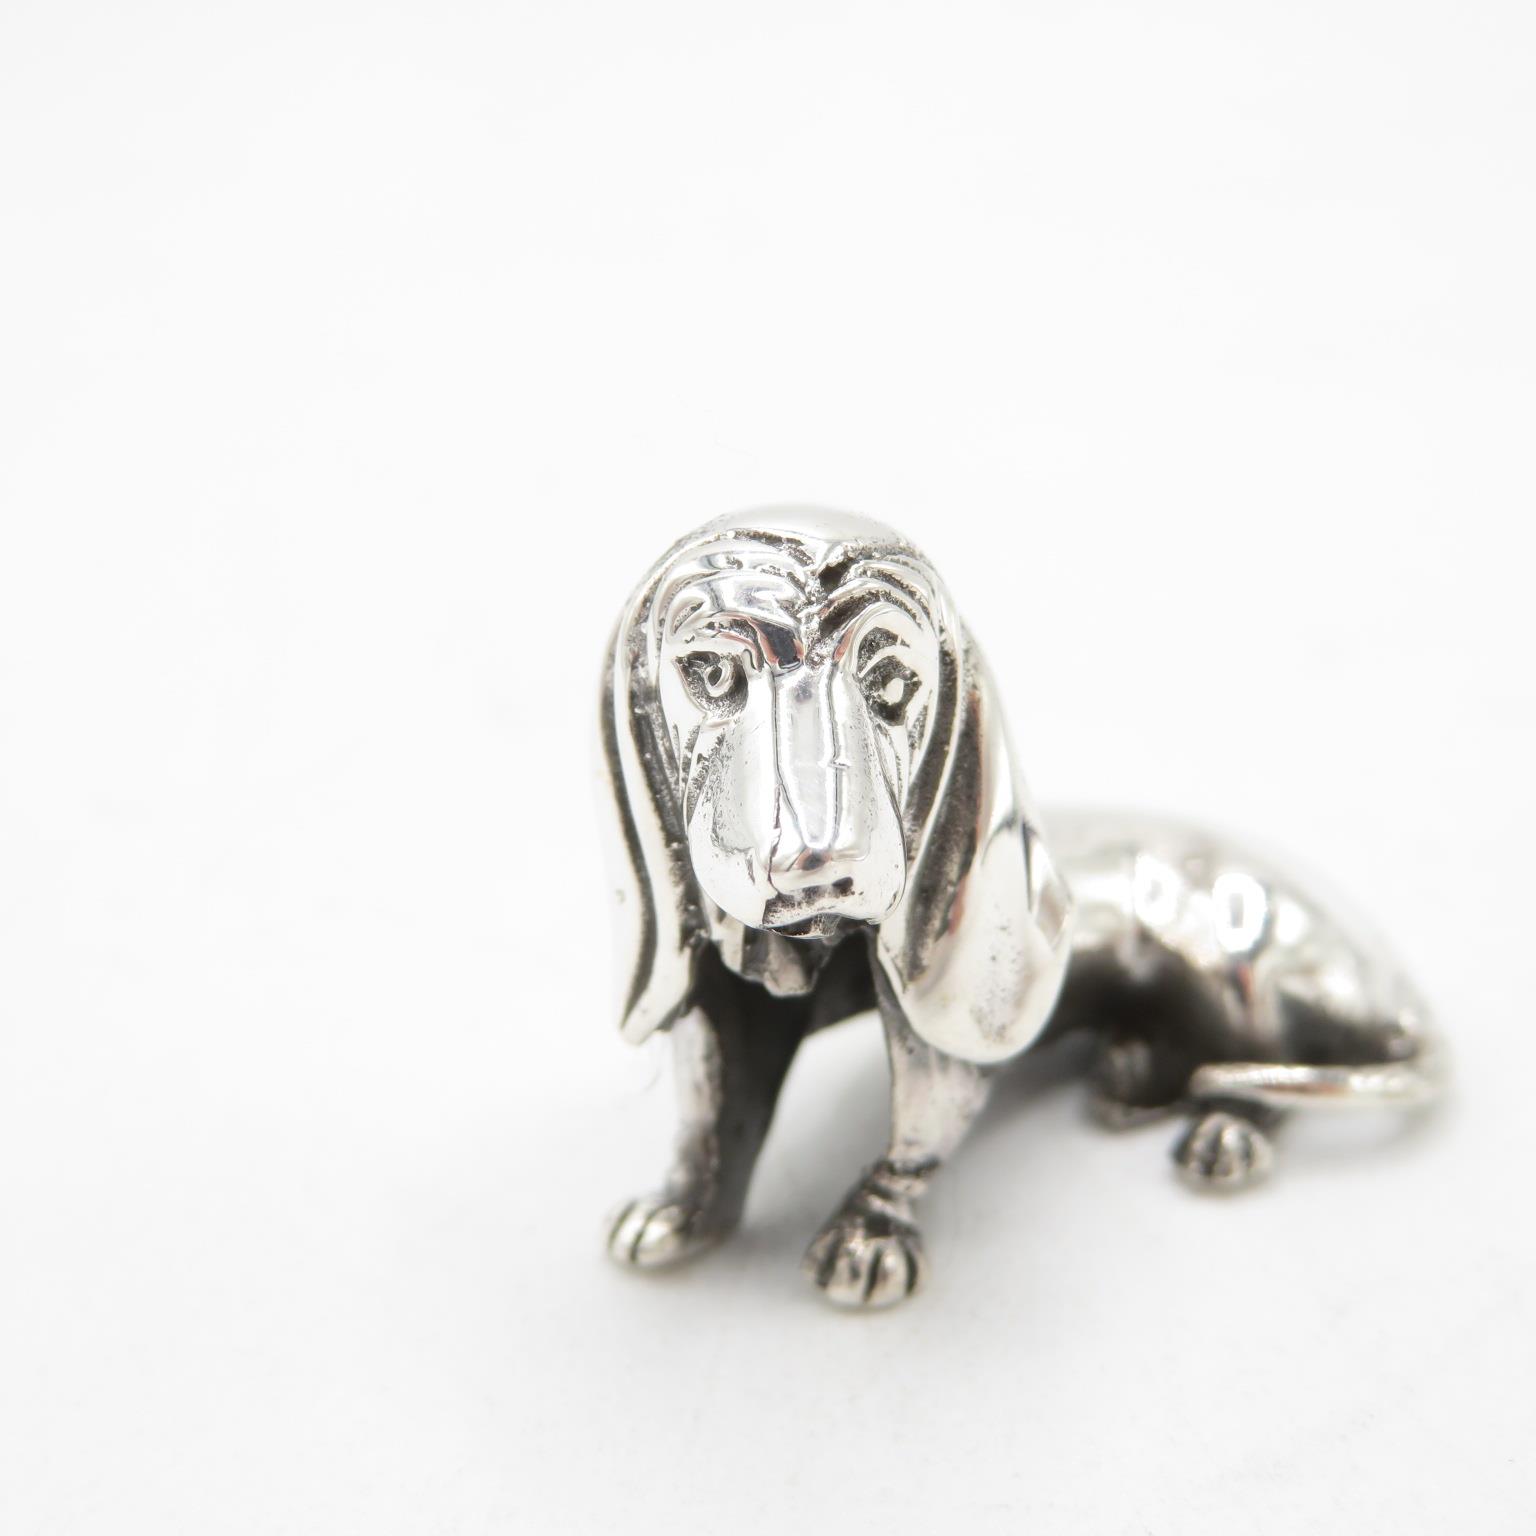 HM 925 Sterling Silver Dachshund Sausage Dog in excellent condition (15g) 40mm long - Image 2 of 5